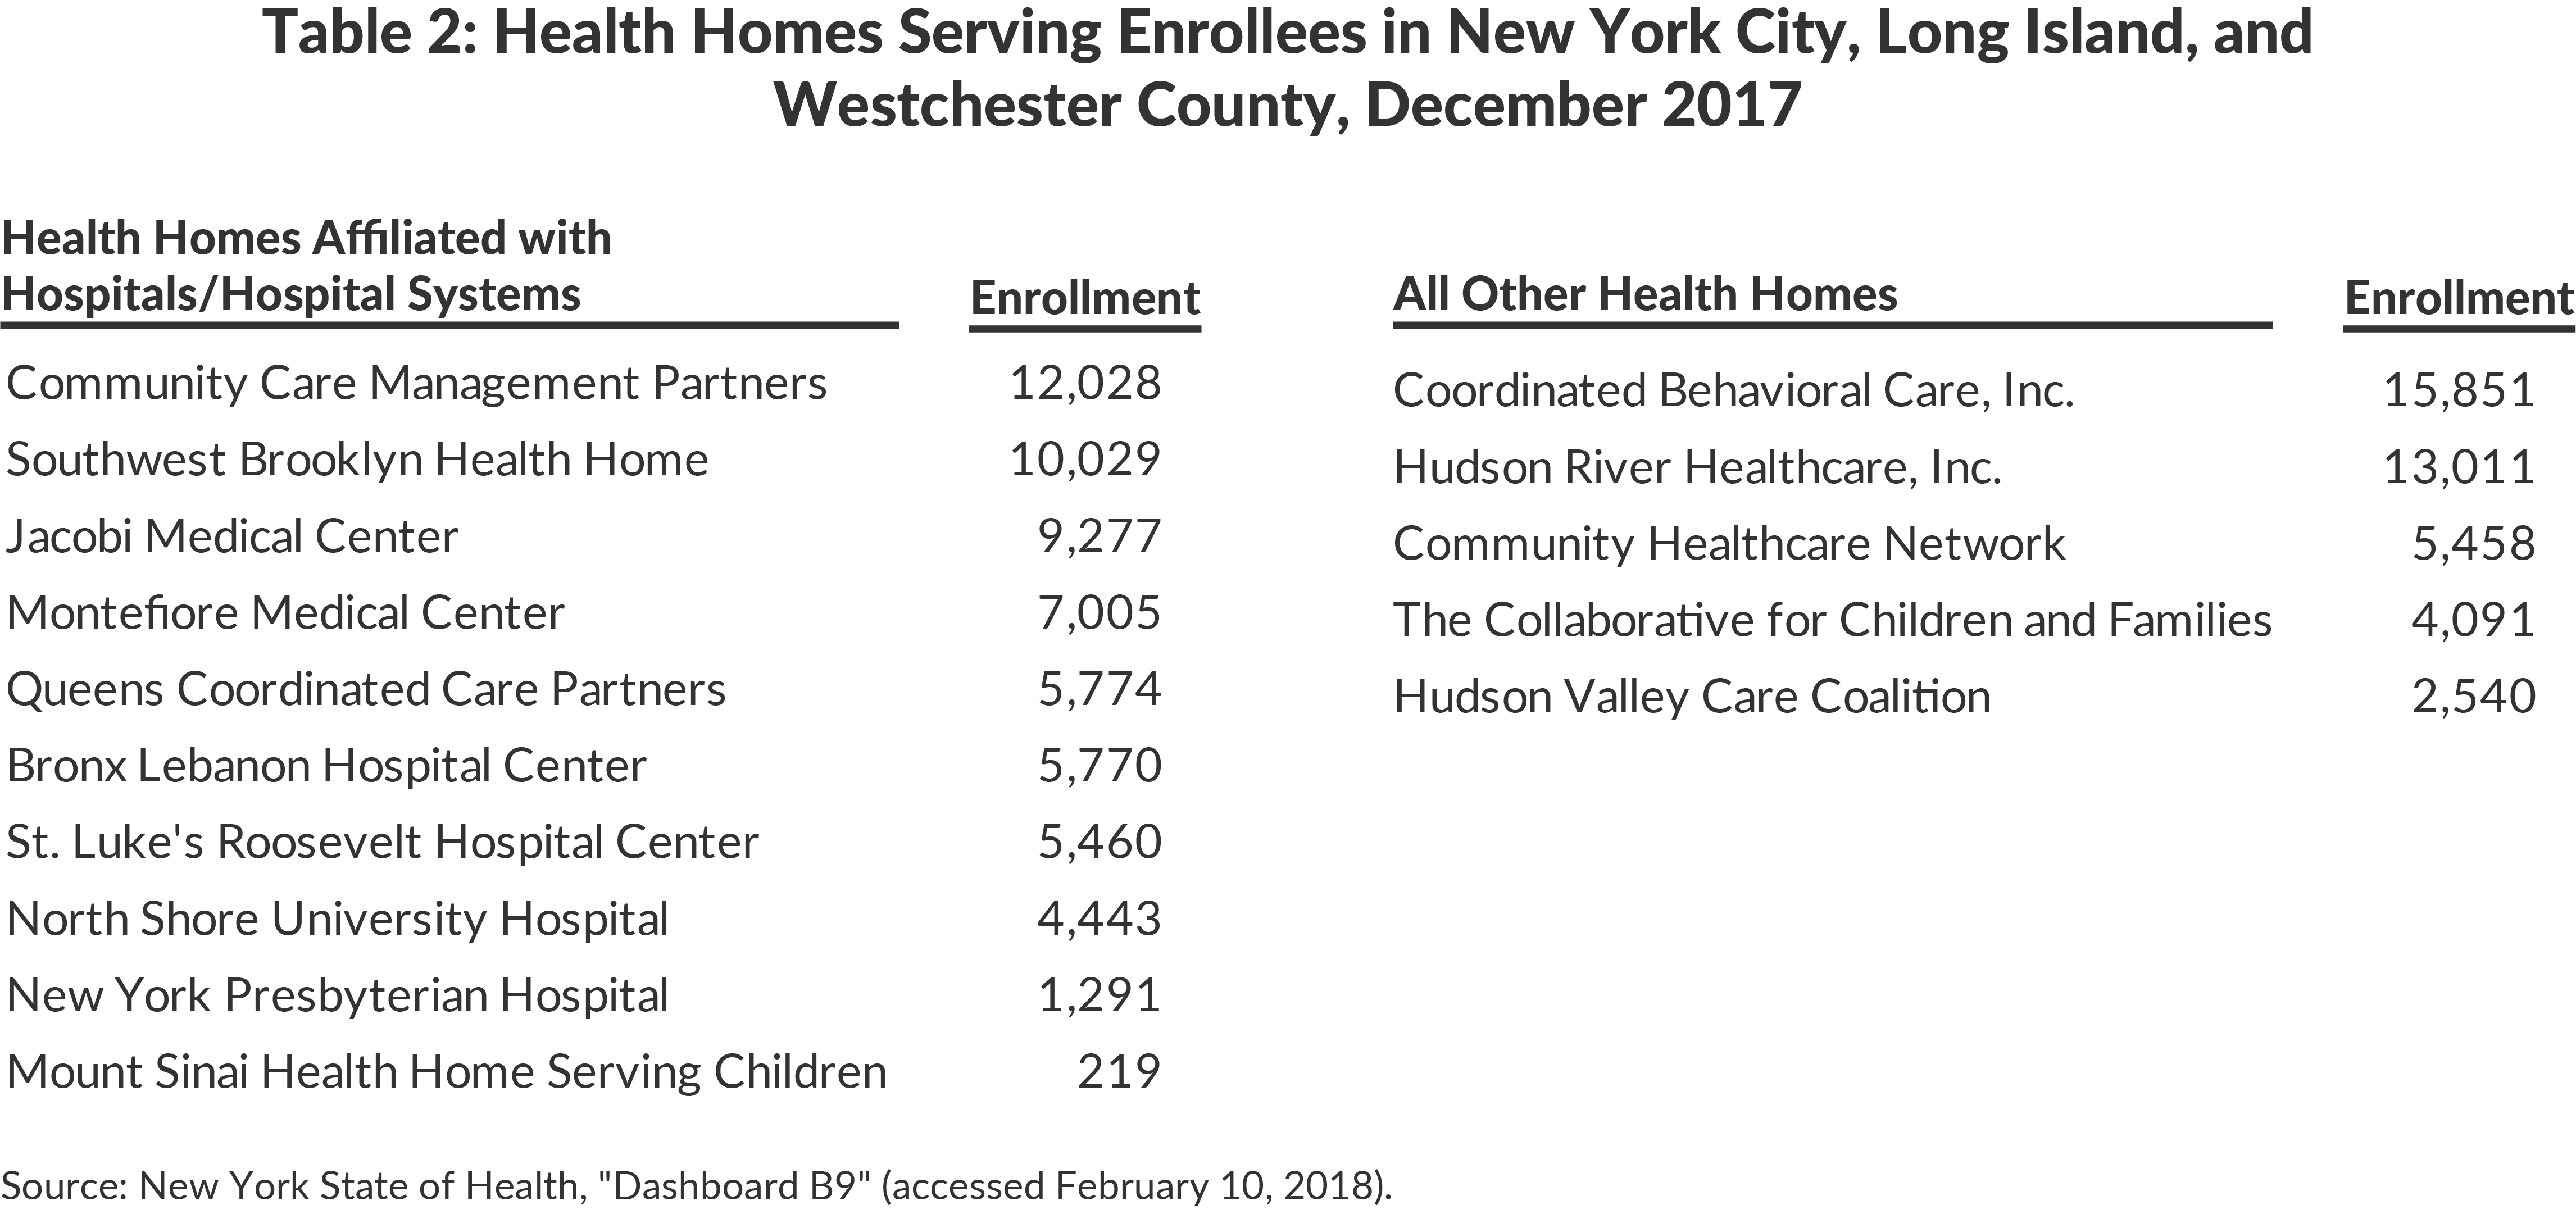 Table 2: Health Homes Serving Enrollees in New York City, Long Island, and Westchester County, December 2017